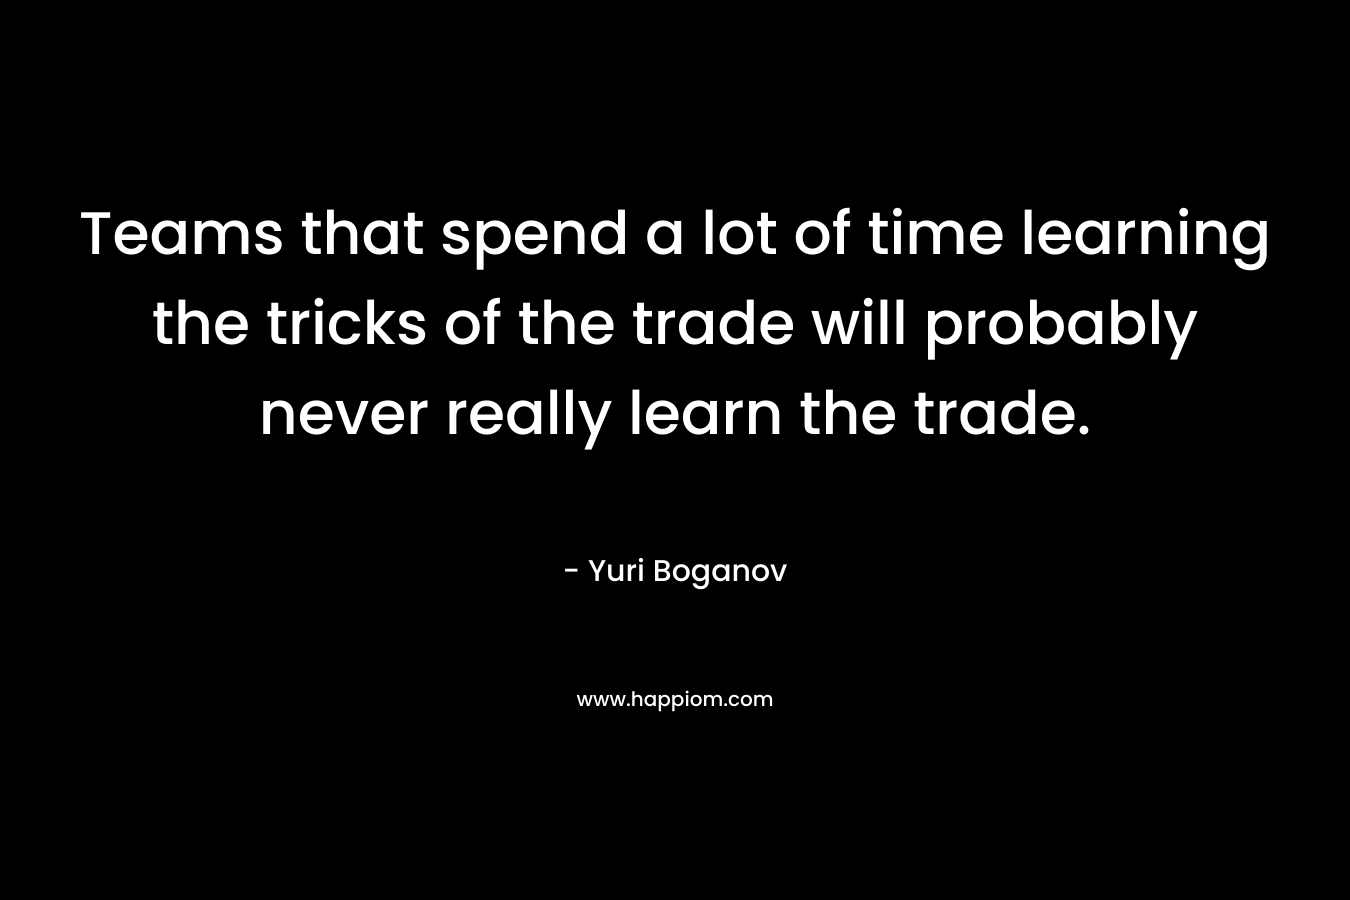 Teams that spend a lot of time learning the tricks of the trade will probably never really learn the trade.